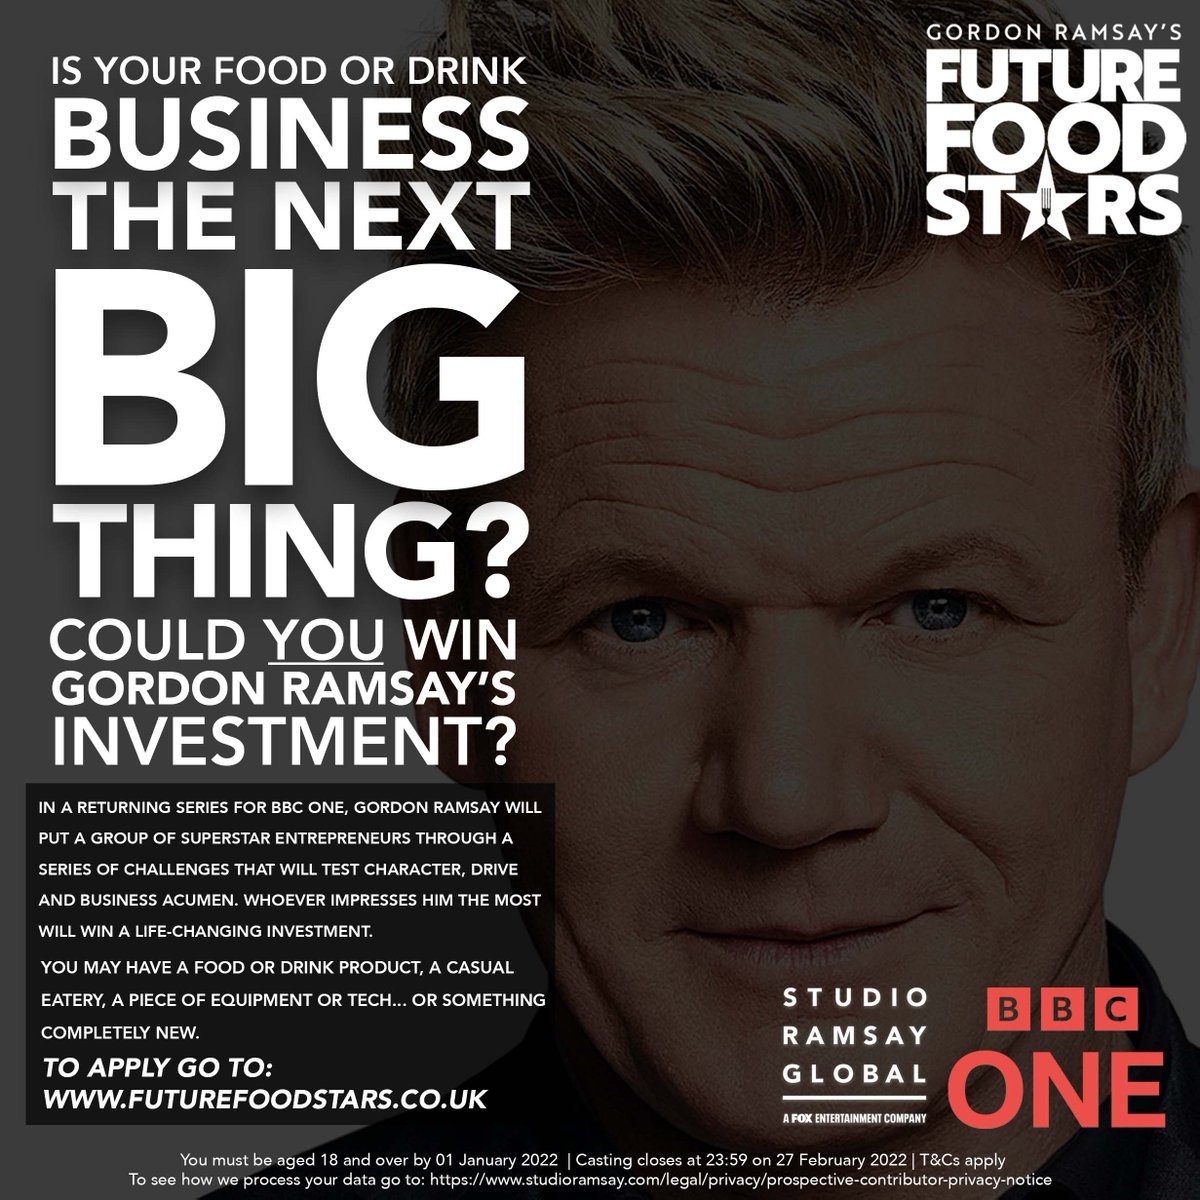 Is your #food and #drink #business the next big thing?
Could you win Gordon Ramsay's investment?  To apply go to:  https://t.co/nBIBCGn3N2 https://t.co/Xzi2oOKLUN